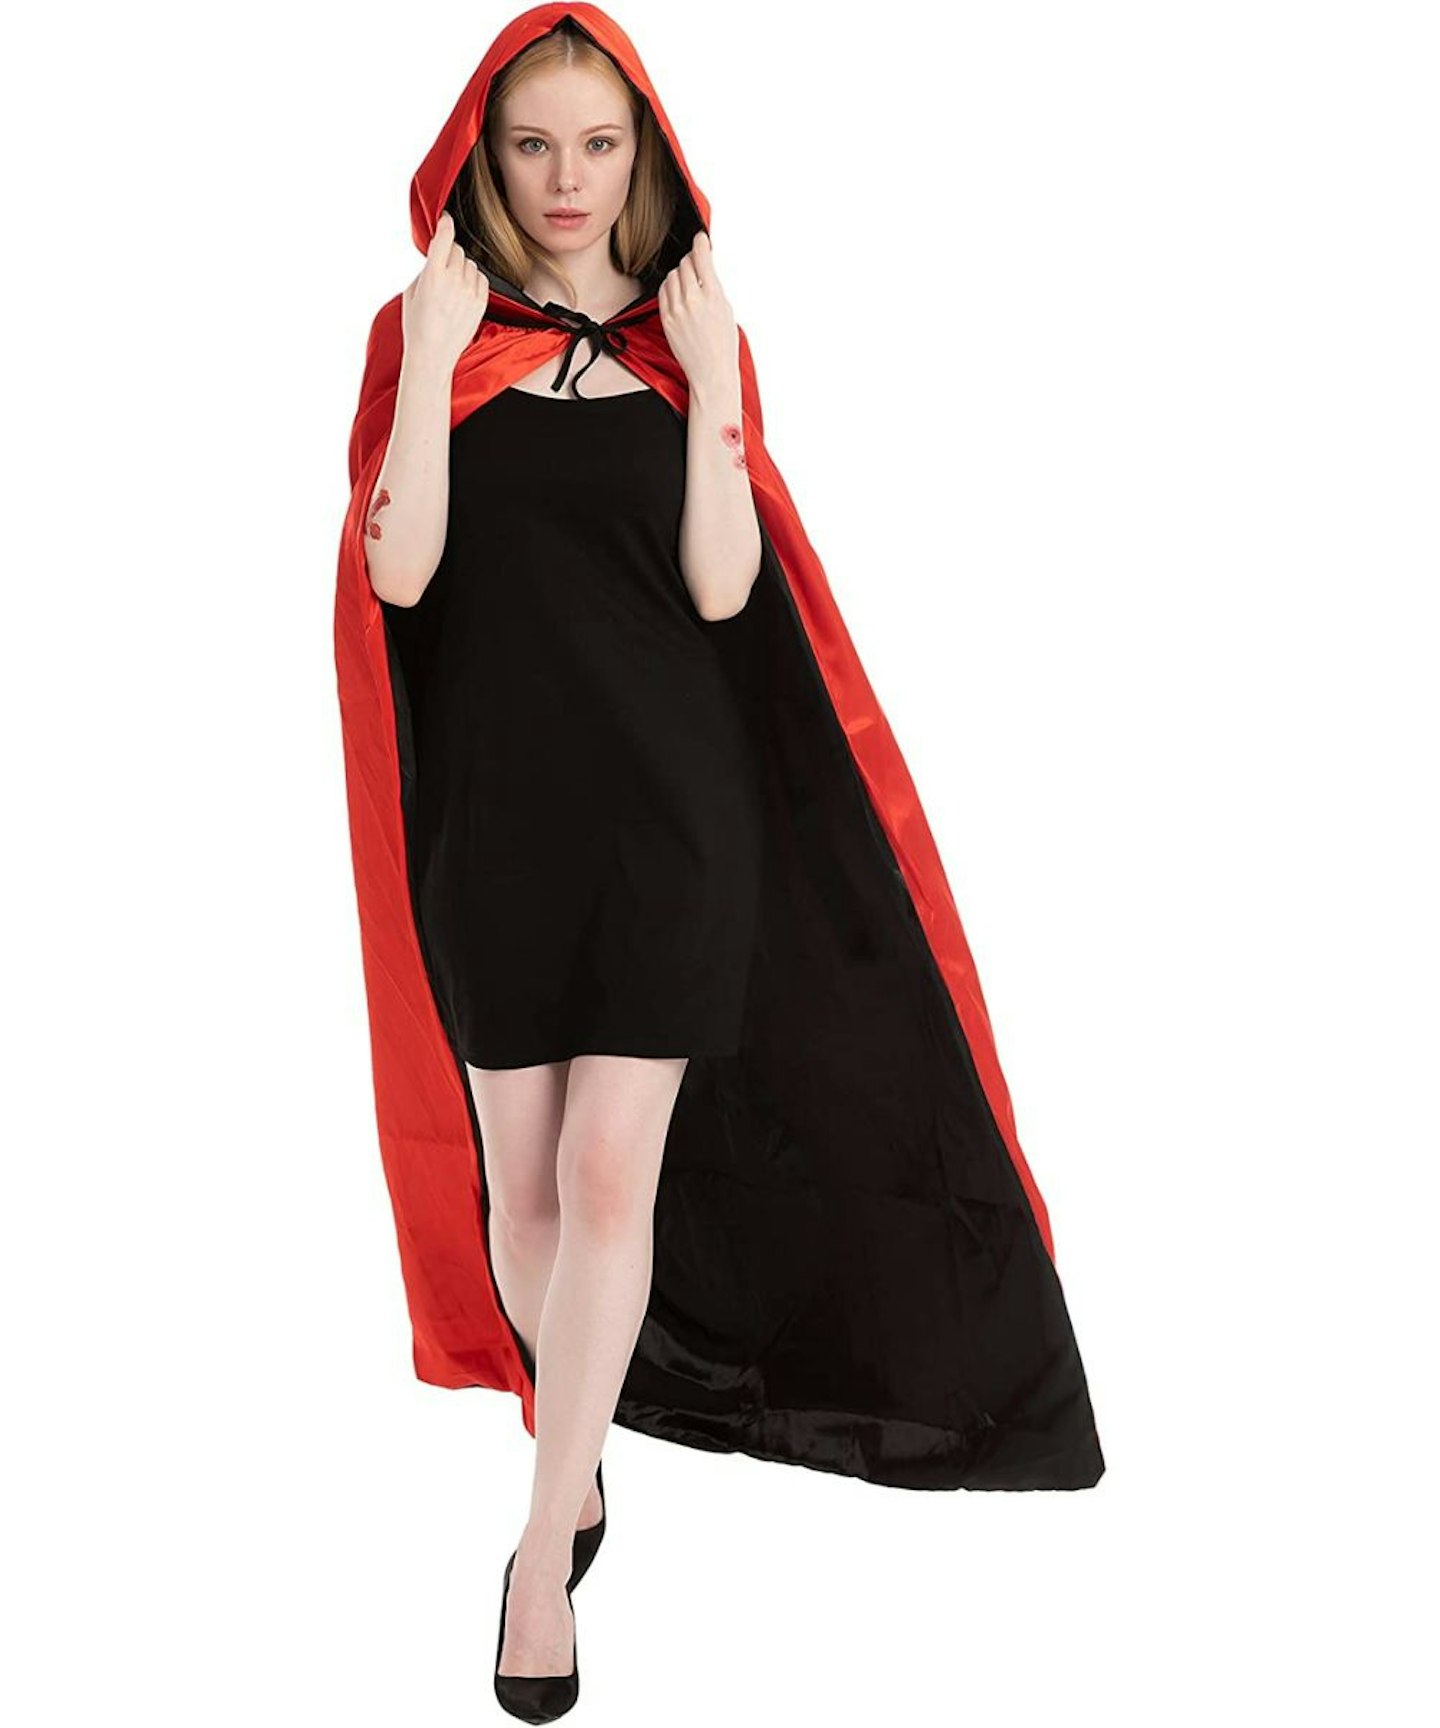 Adult Unisex Vampire Costume Set with Reversible Hooded Cape